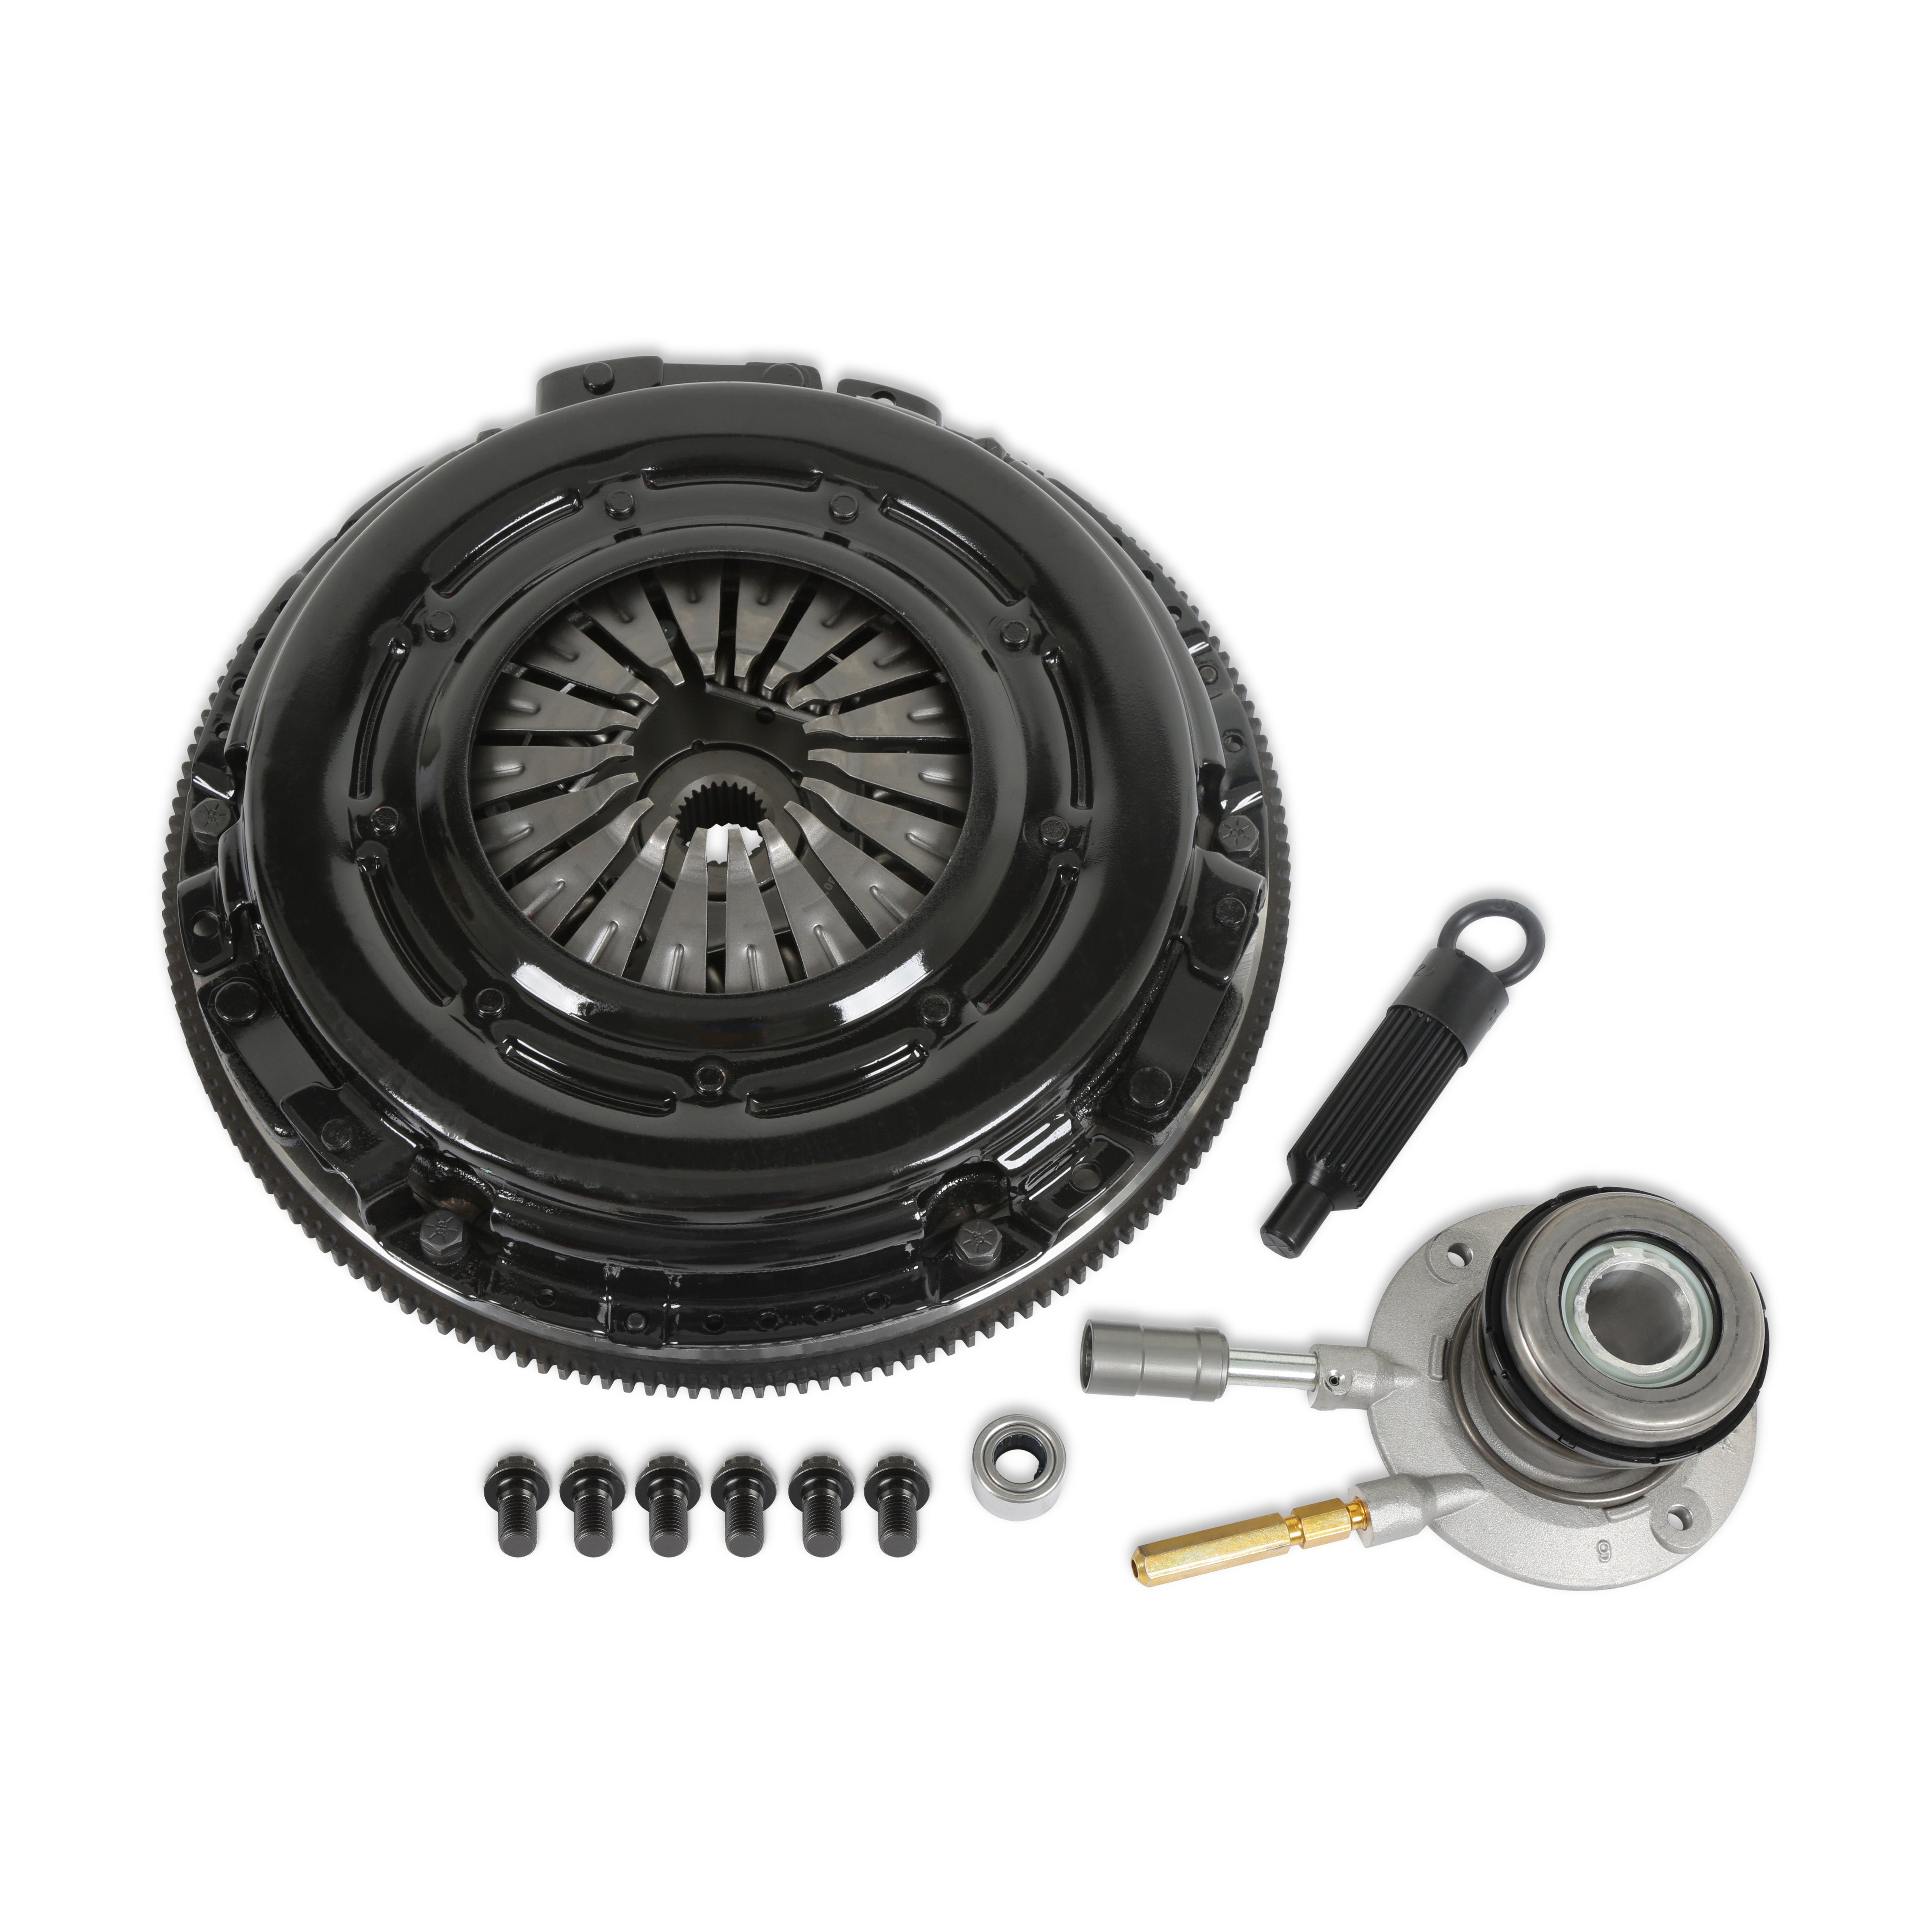 Holley Transmission Clutch and Flywheel Kit 319-575